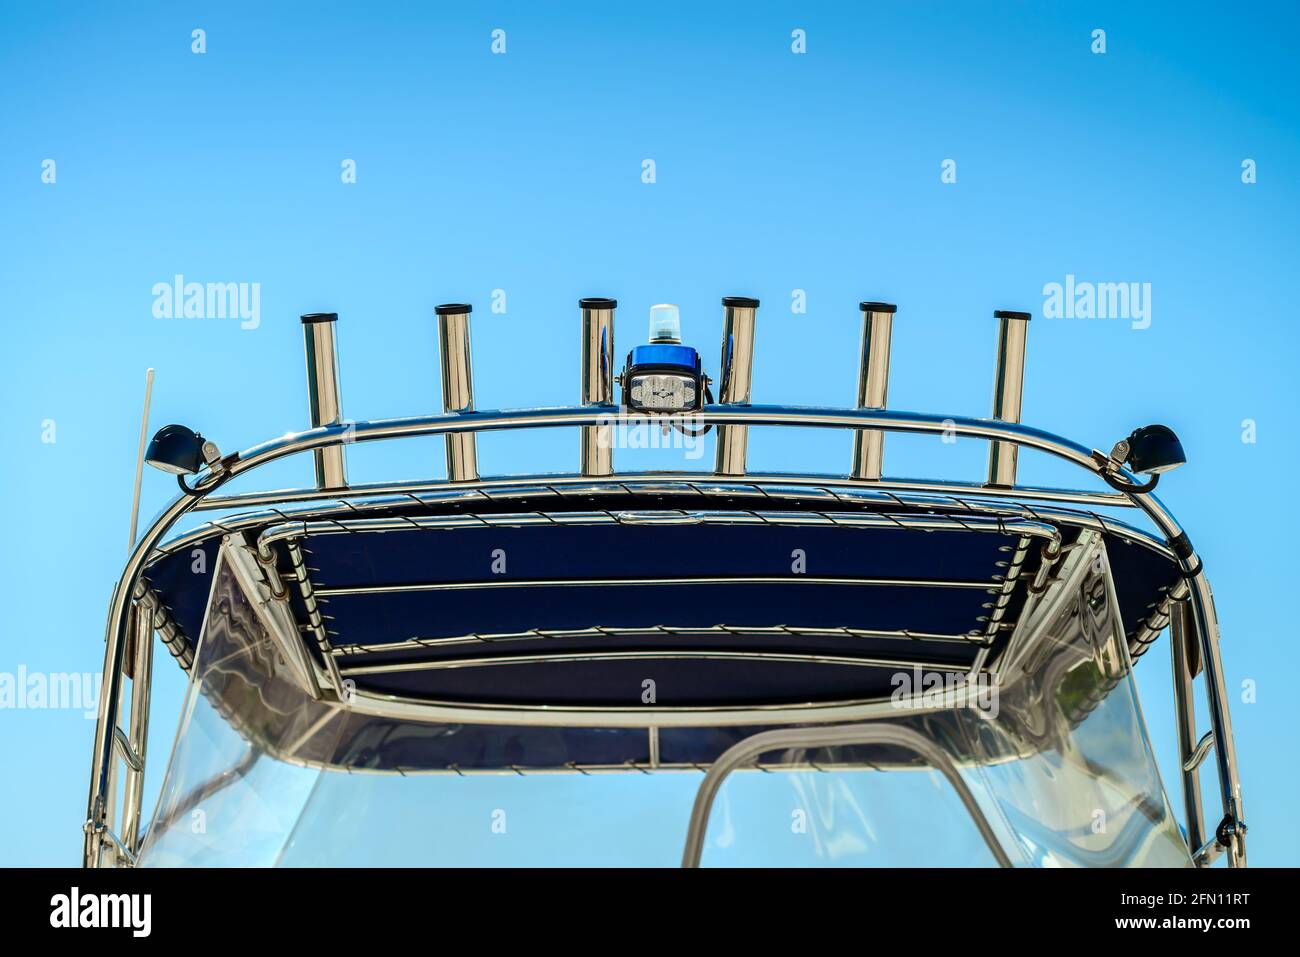 https://c8.alamy.com/comp/2FN11RT/fishing-rod-holders-installed-on-top-of-the-boat-canopy-2FN11RT.jpg